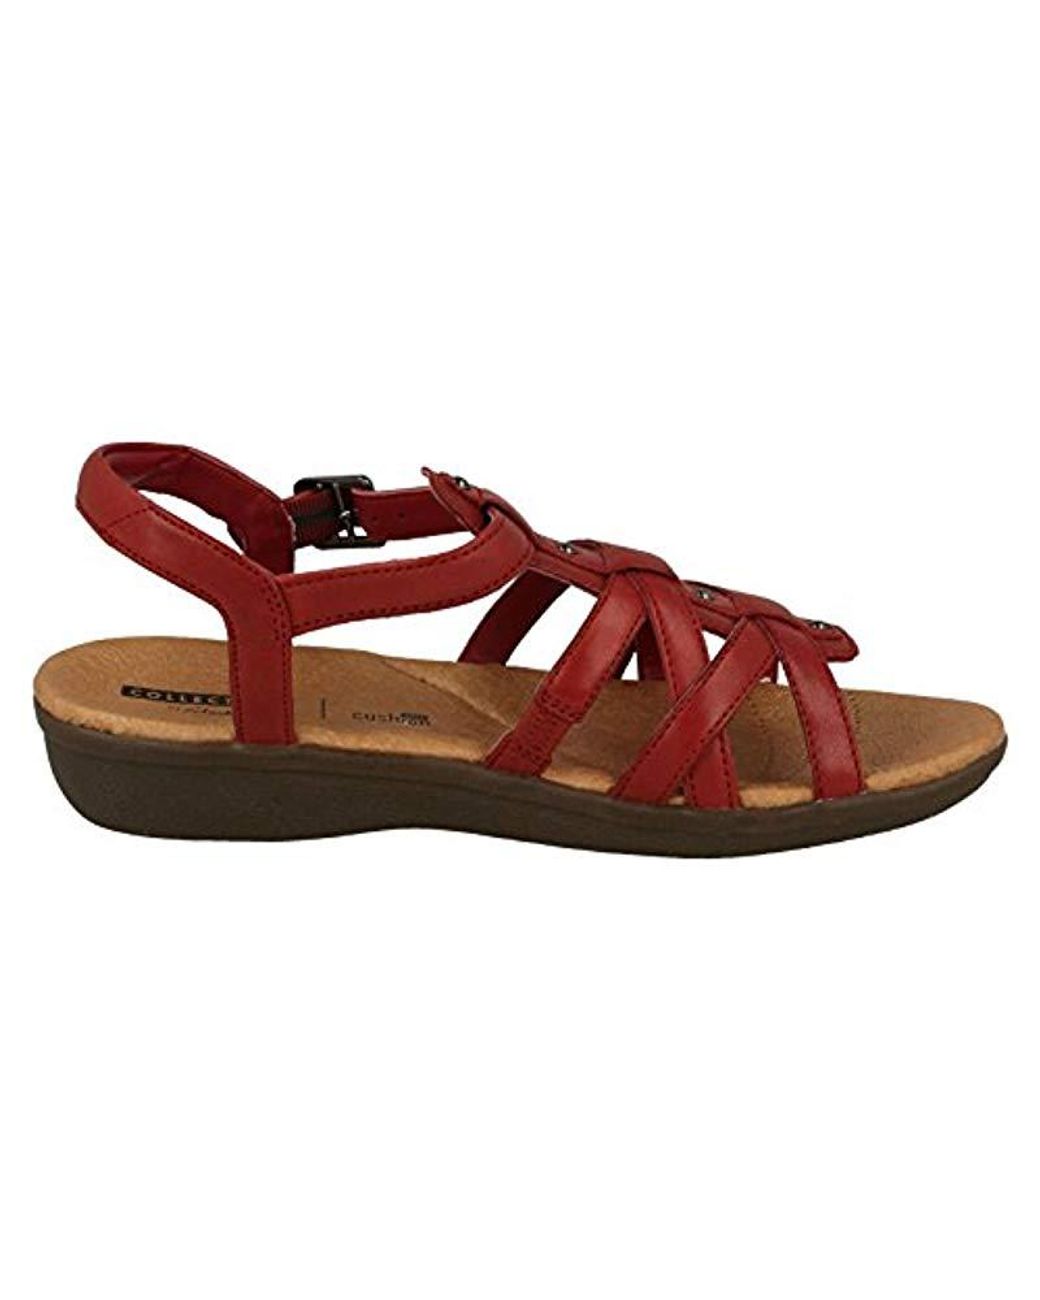 Clarks Leather Manilla Bonita Sling Back Sandals in Red | Lyst UK